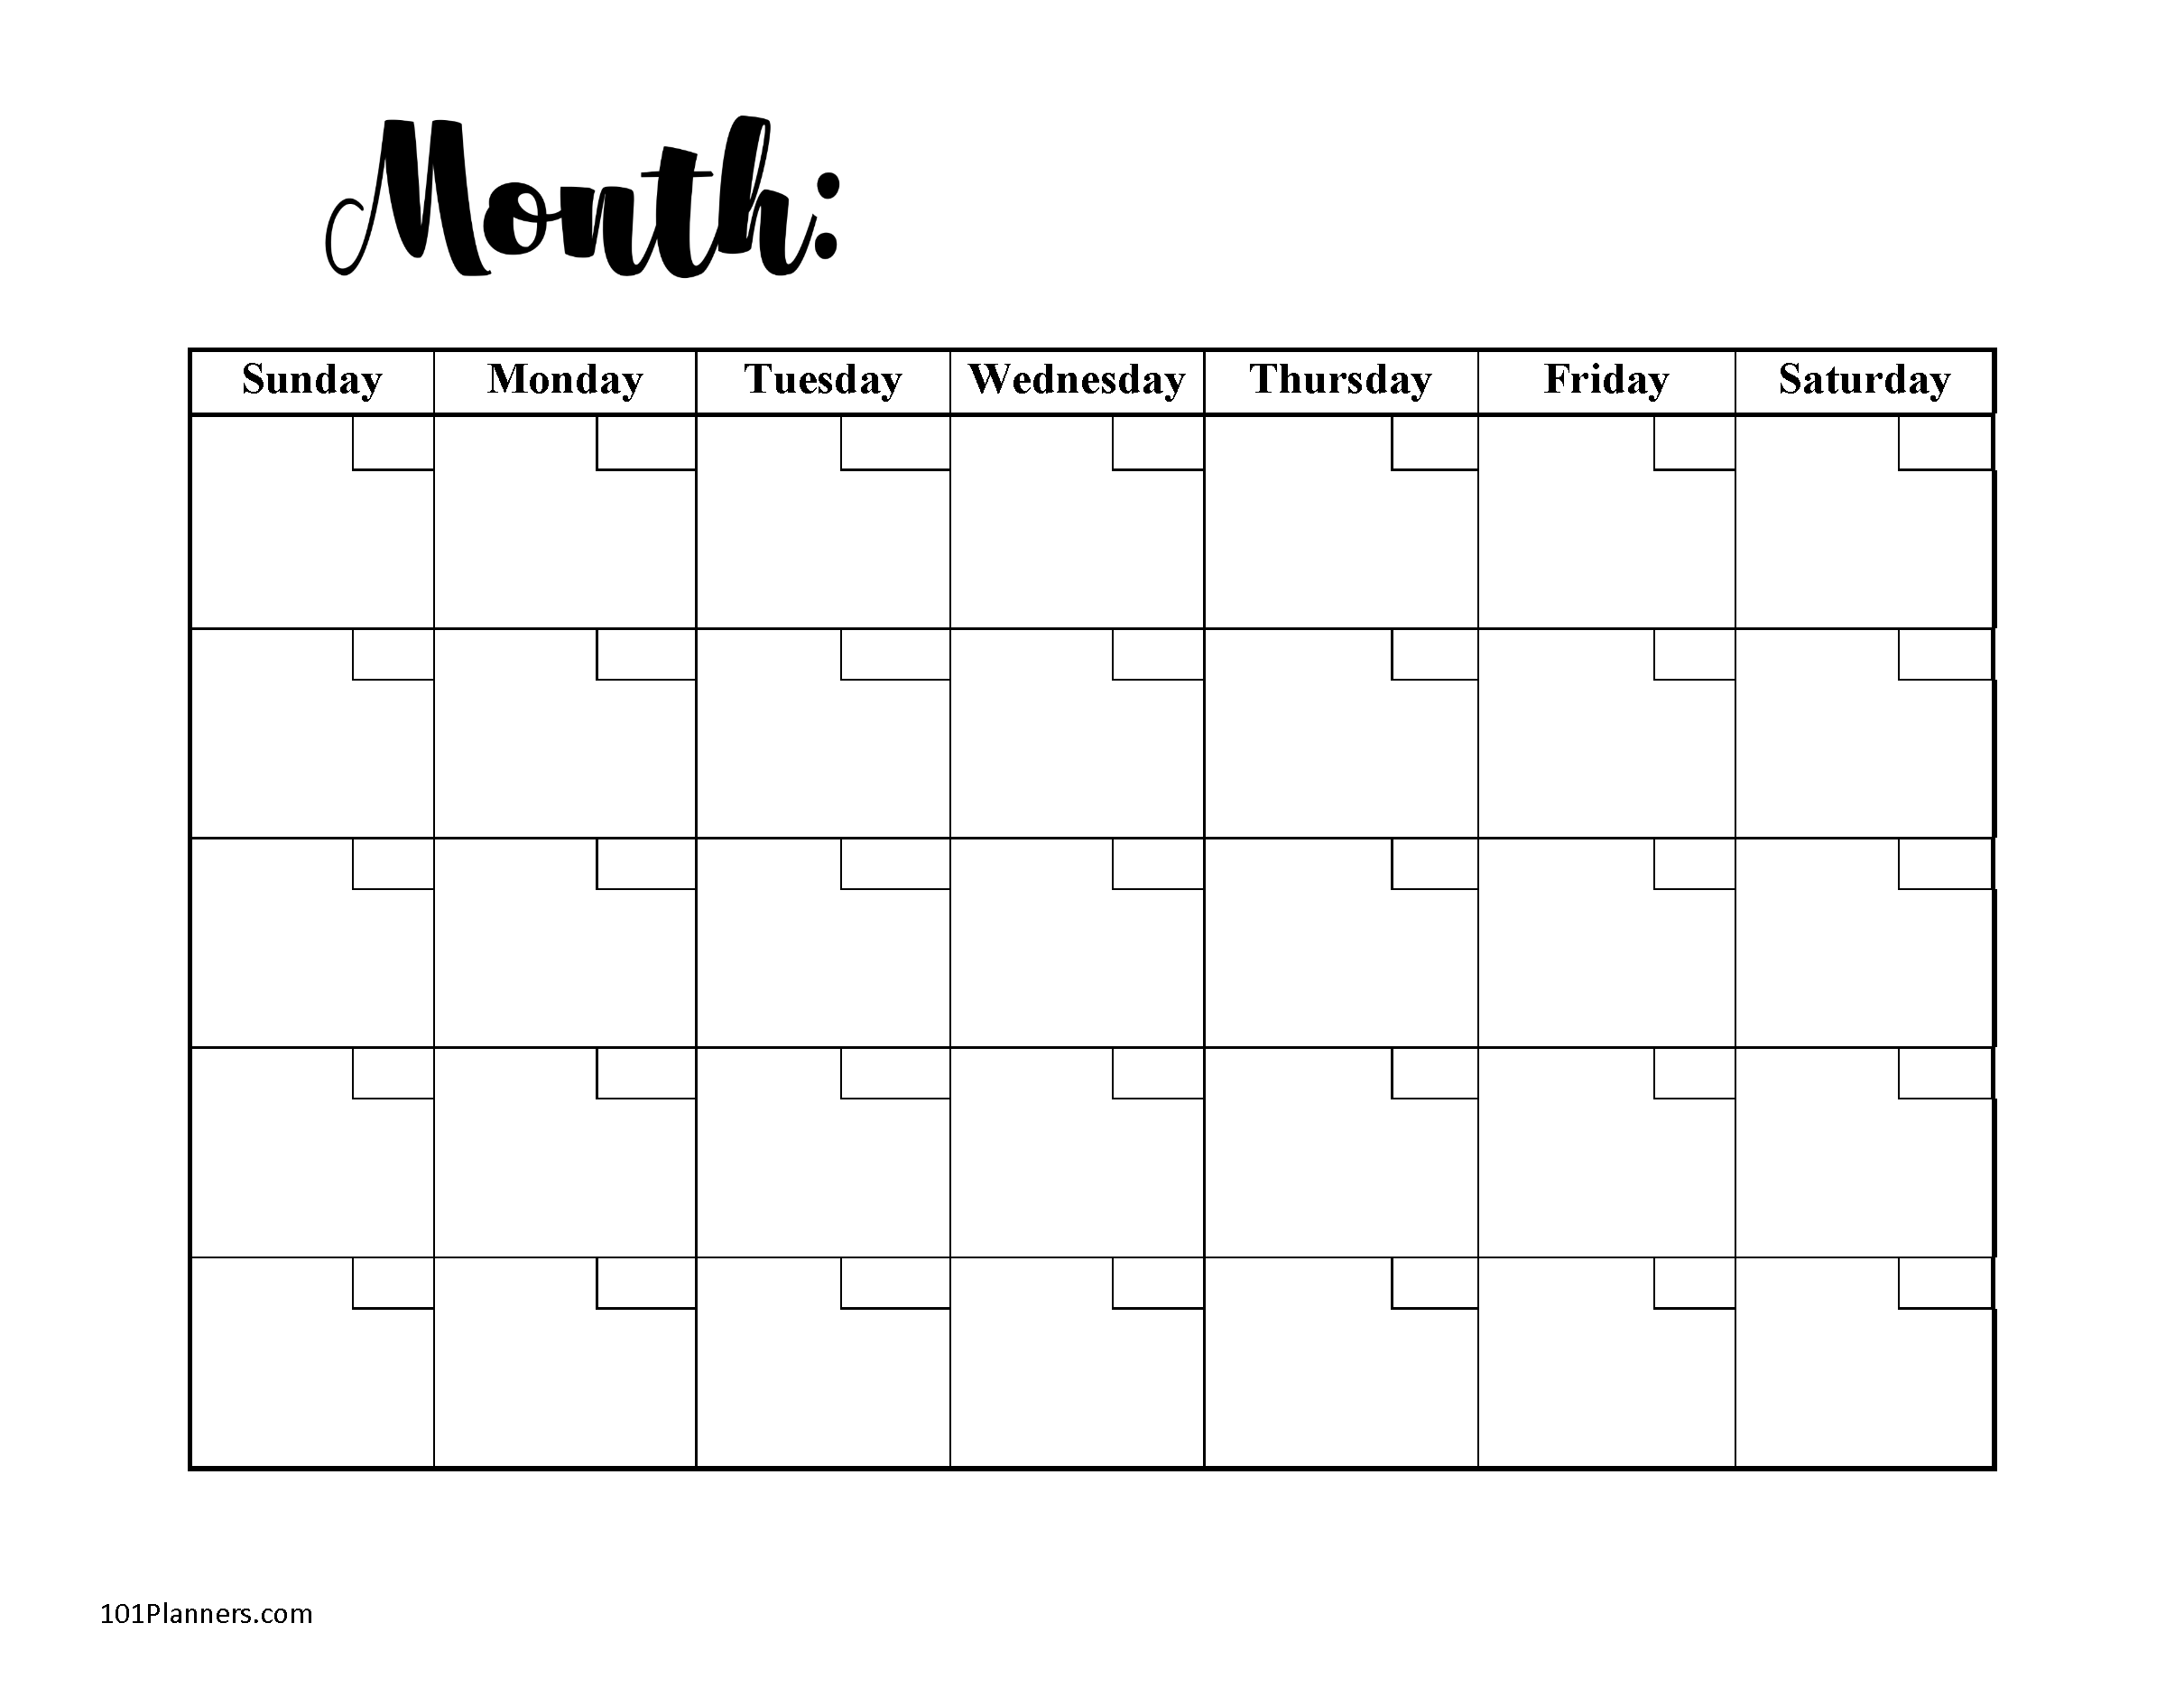 Free Blank Calendar Templates | Word, Excel, Pdf For Any Month